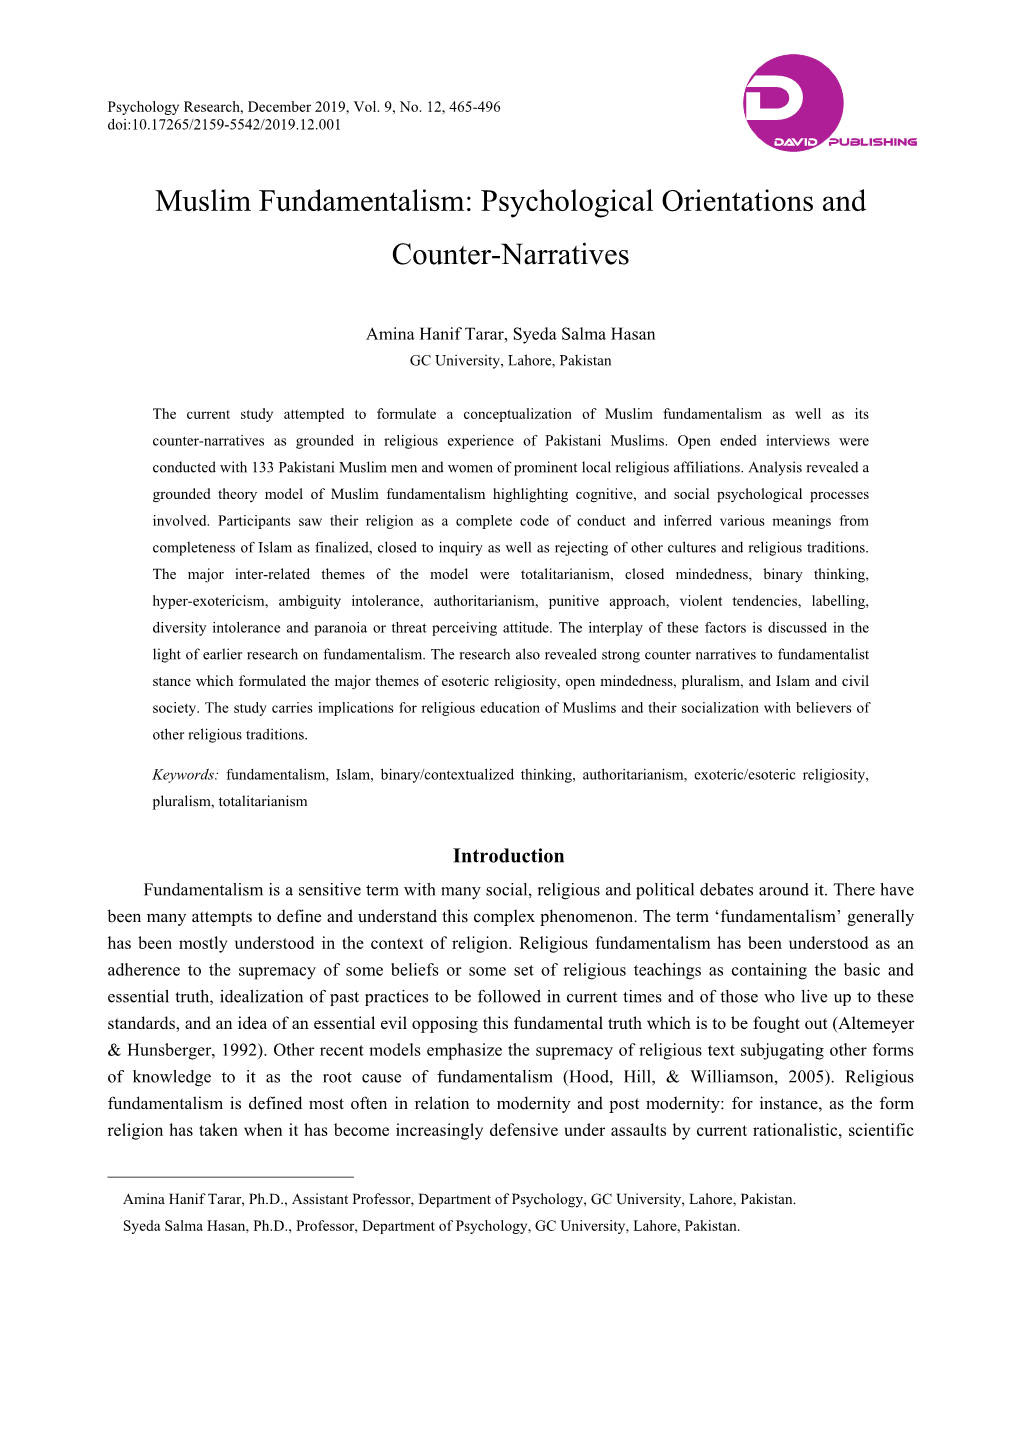 Psychological Orientations and Counter-Narratives